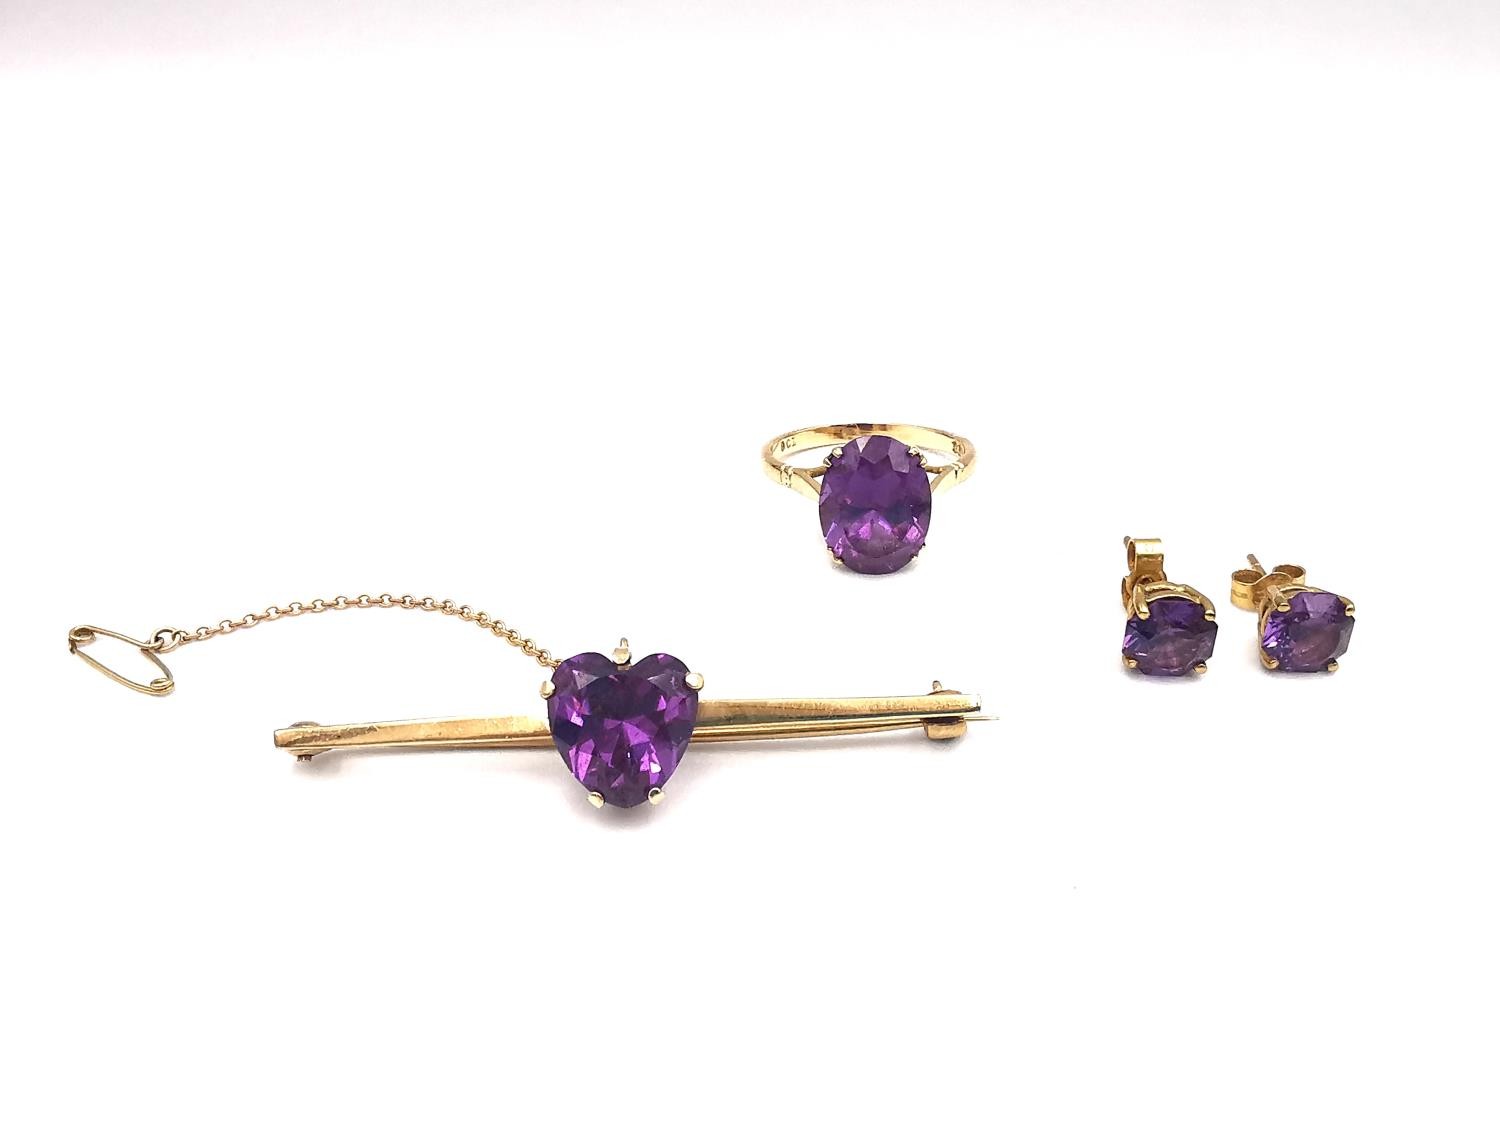 A 9ct gold and synthetic colour change sapphire parure. A 9ct gold bar brooch with a heart shaped